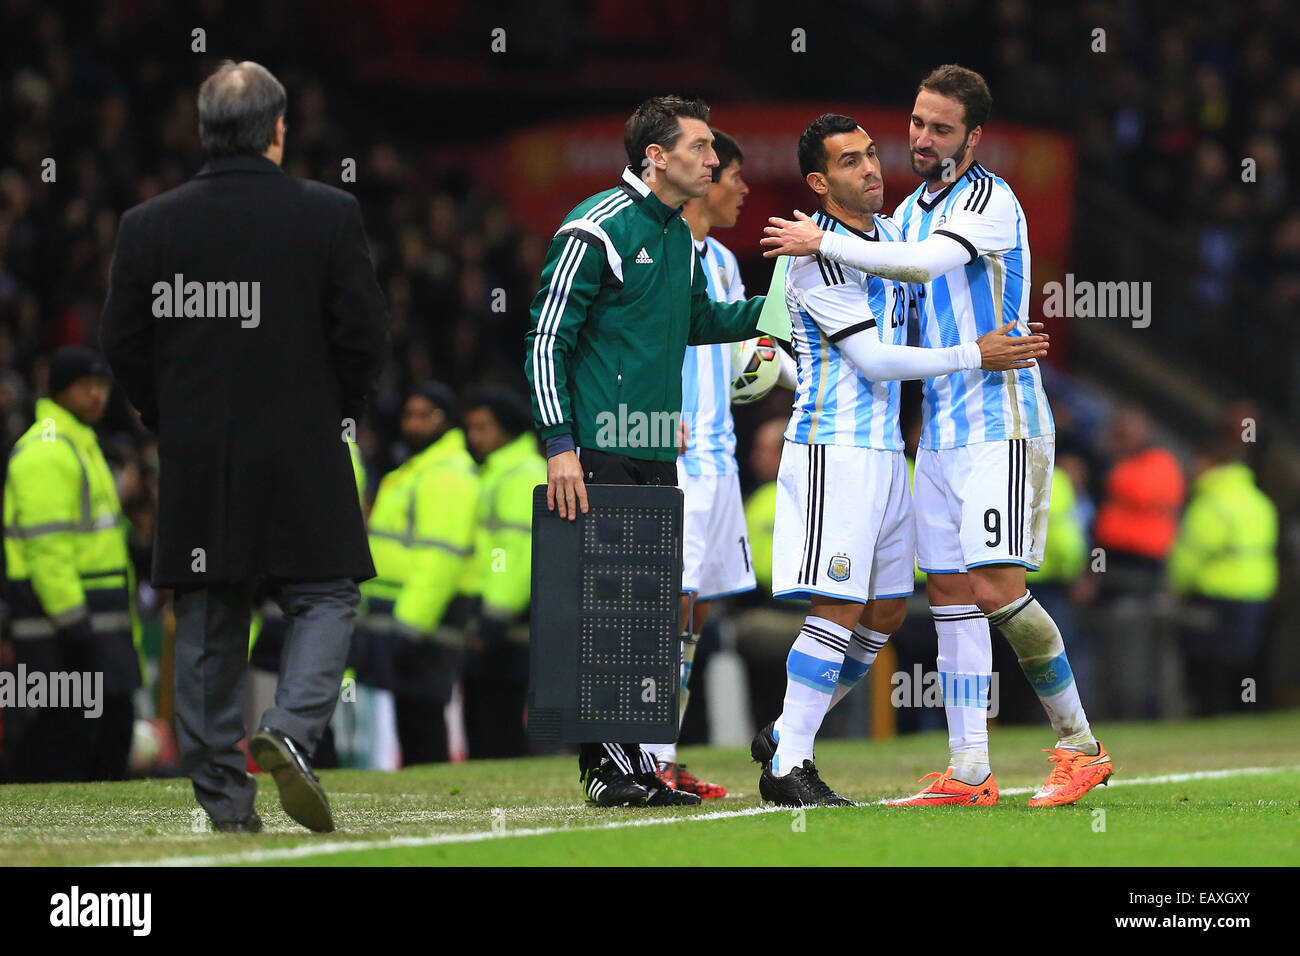 Nov. 18, 2014 - Manchester, United Kingdom - Carlos Tevez replaces Gonzalo Higuain of Argentina - Argentina vs. Portugal - International Friendly - Old Trafford - Manchester - 18/11/2014 Pic Philip Oldham/Sportimage. Stock Photo